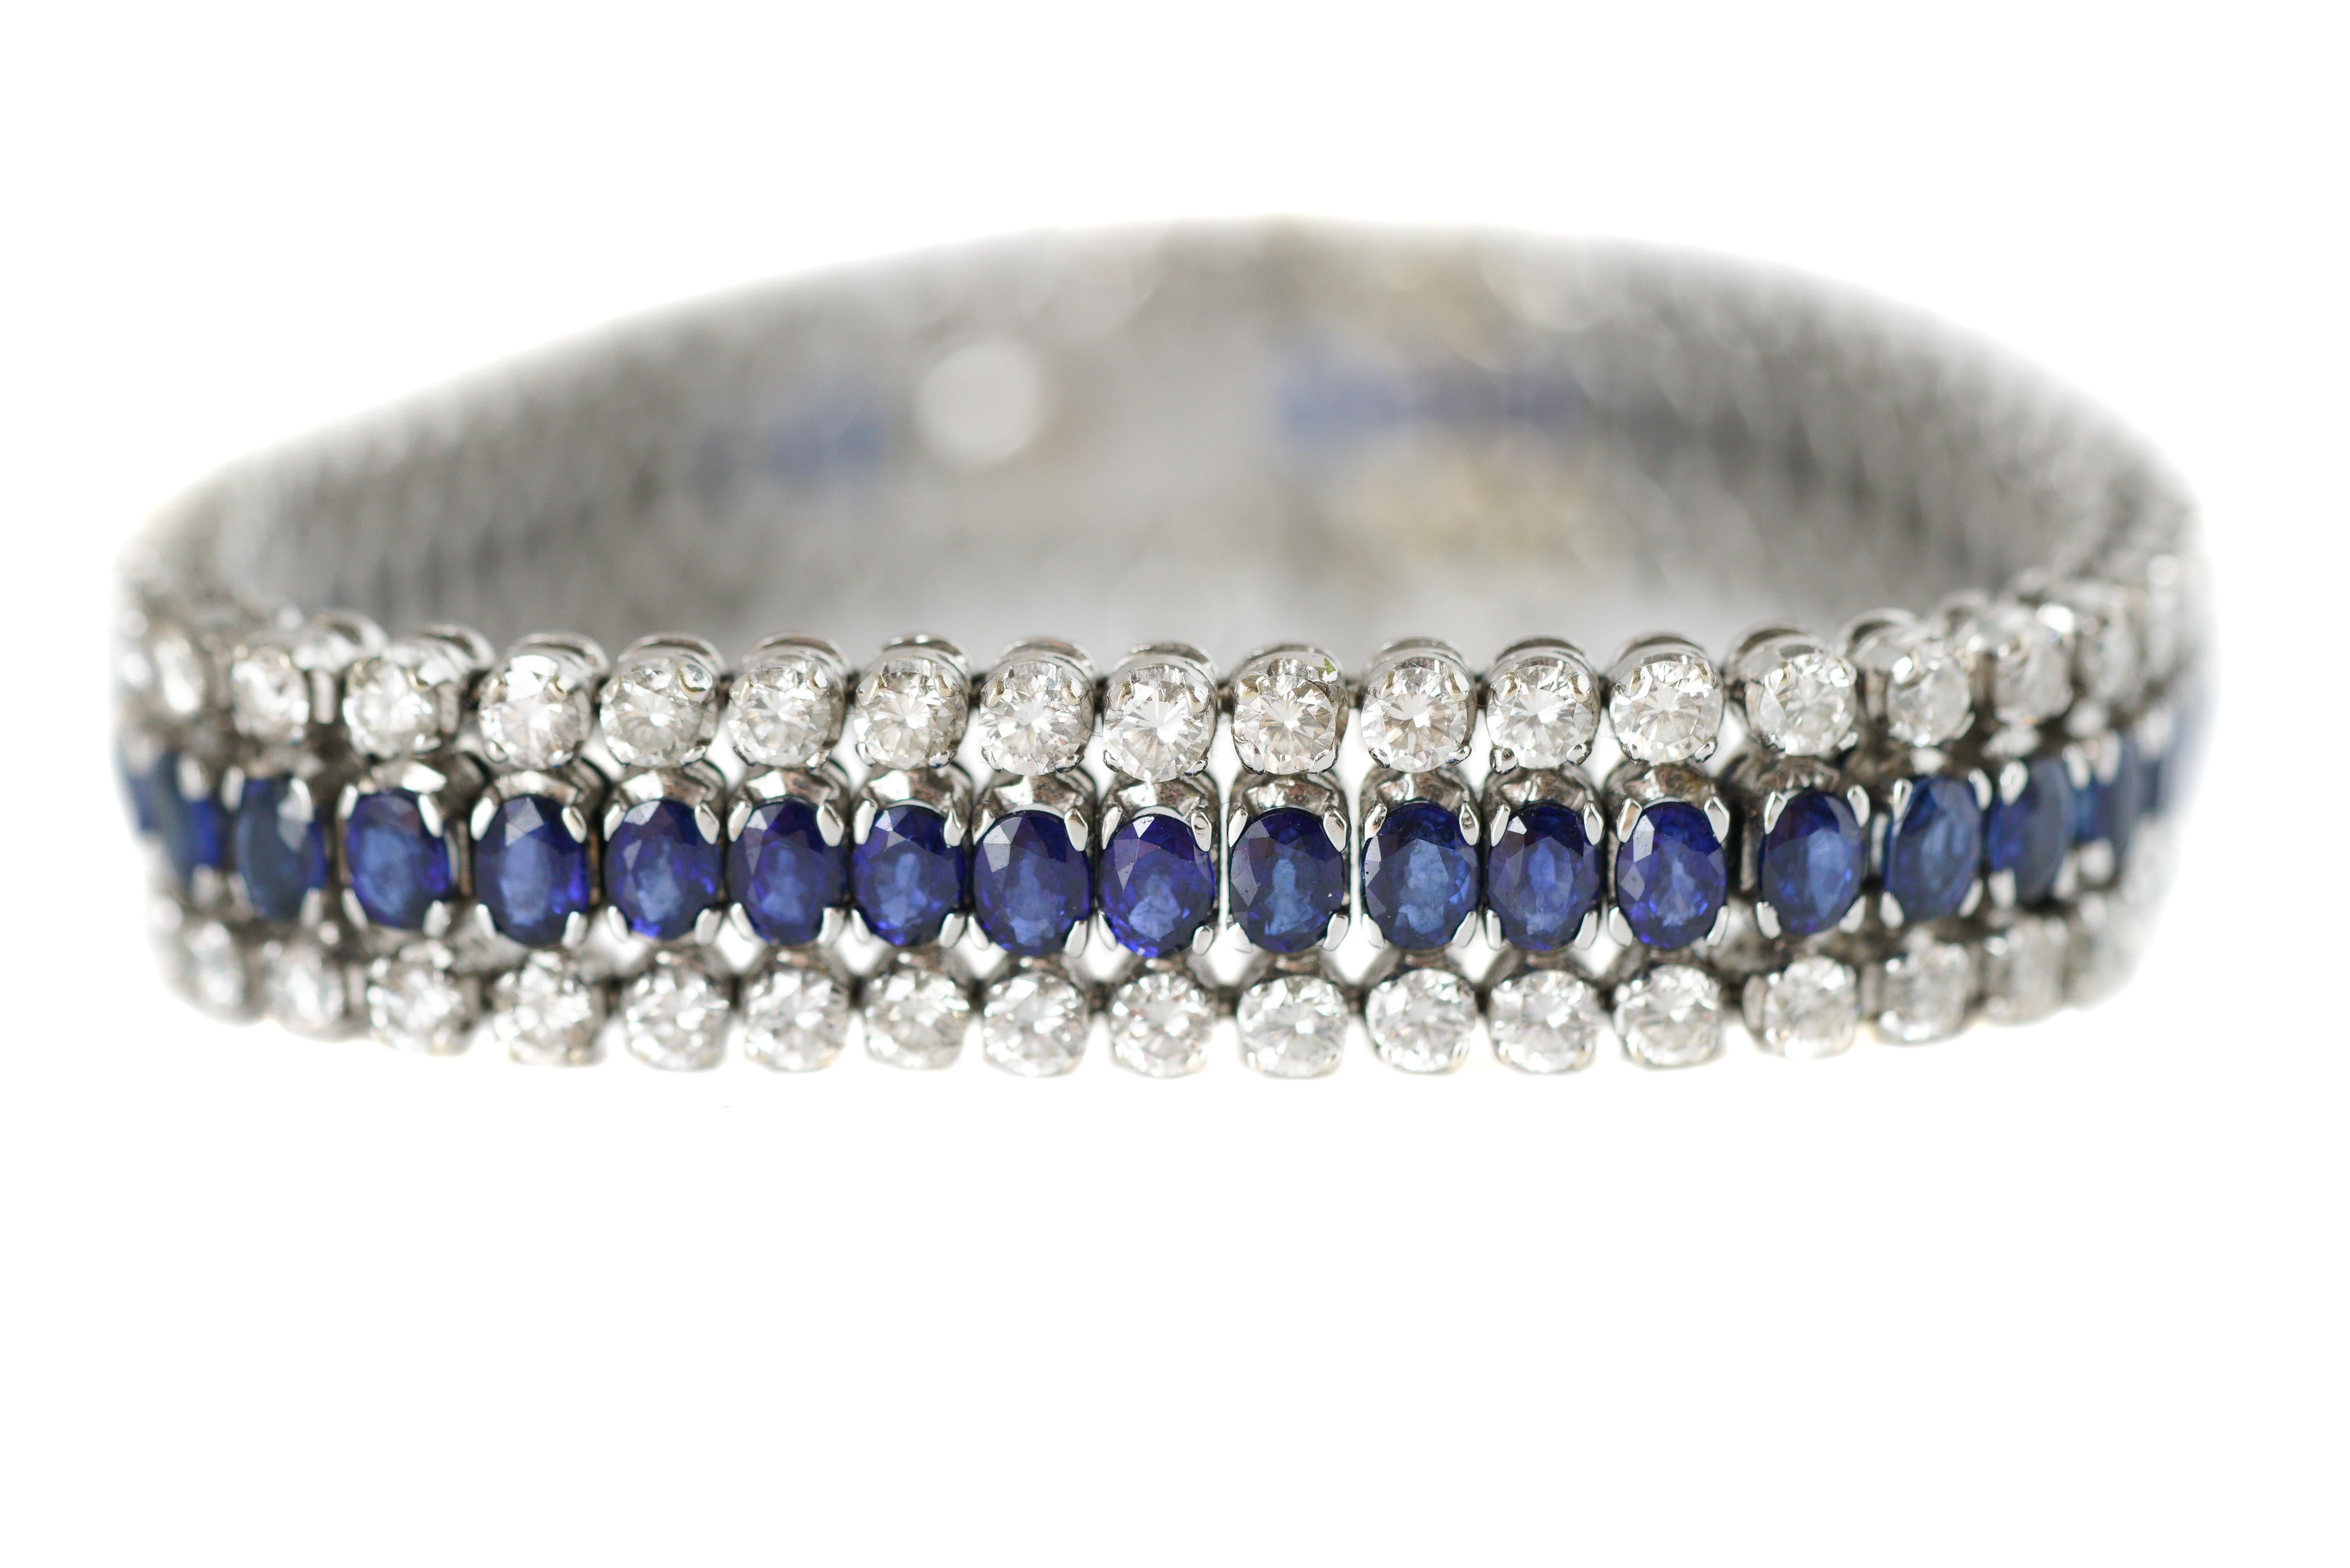 This Brand New, Never Worn exquisite Sapphire and Diamond Link Bracelet features:

10.6 carat total Oval cut Deep Blue Sapphires
6.36 carat total Round Brilliant Diamonds
All crafted in 18 karat White Gold Bracelet

Box Clasp with 2 Safety Clasps